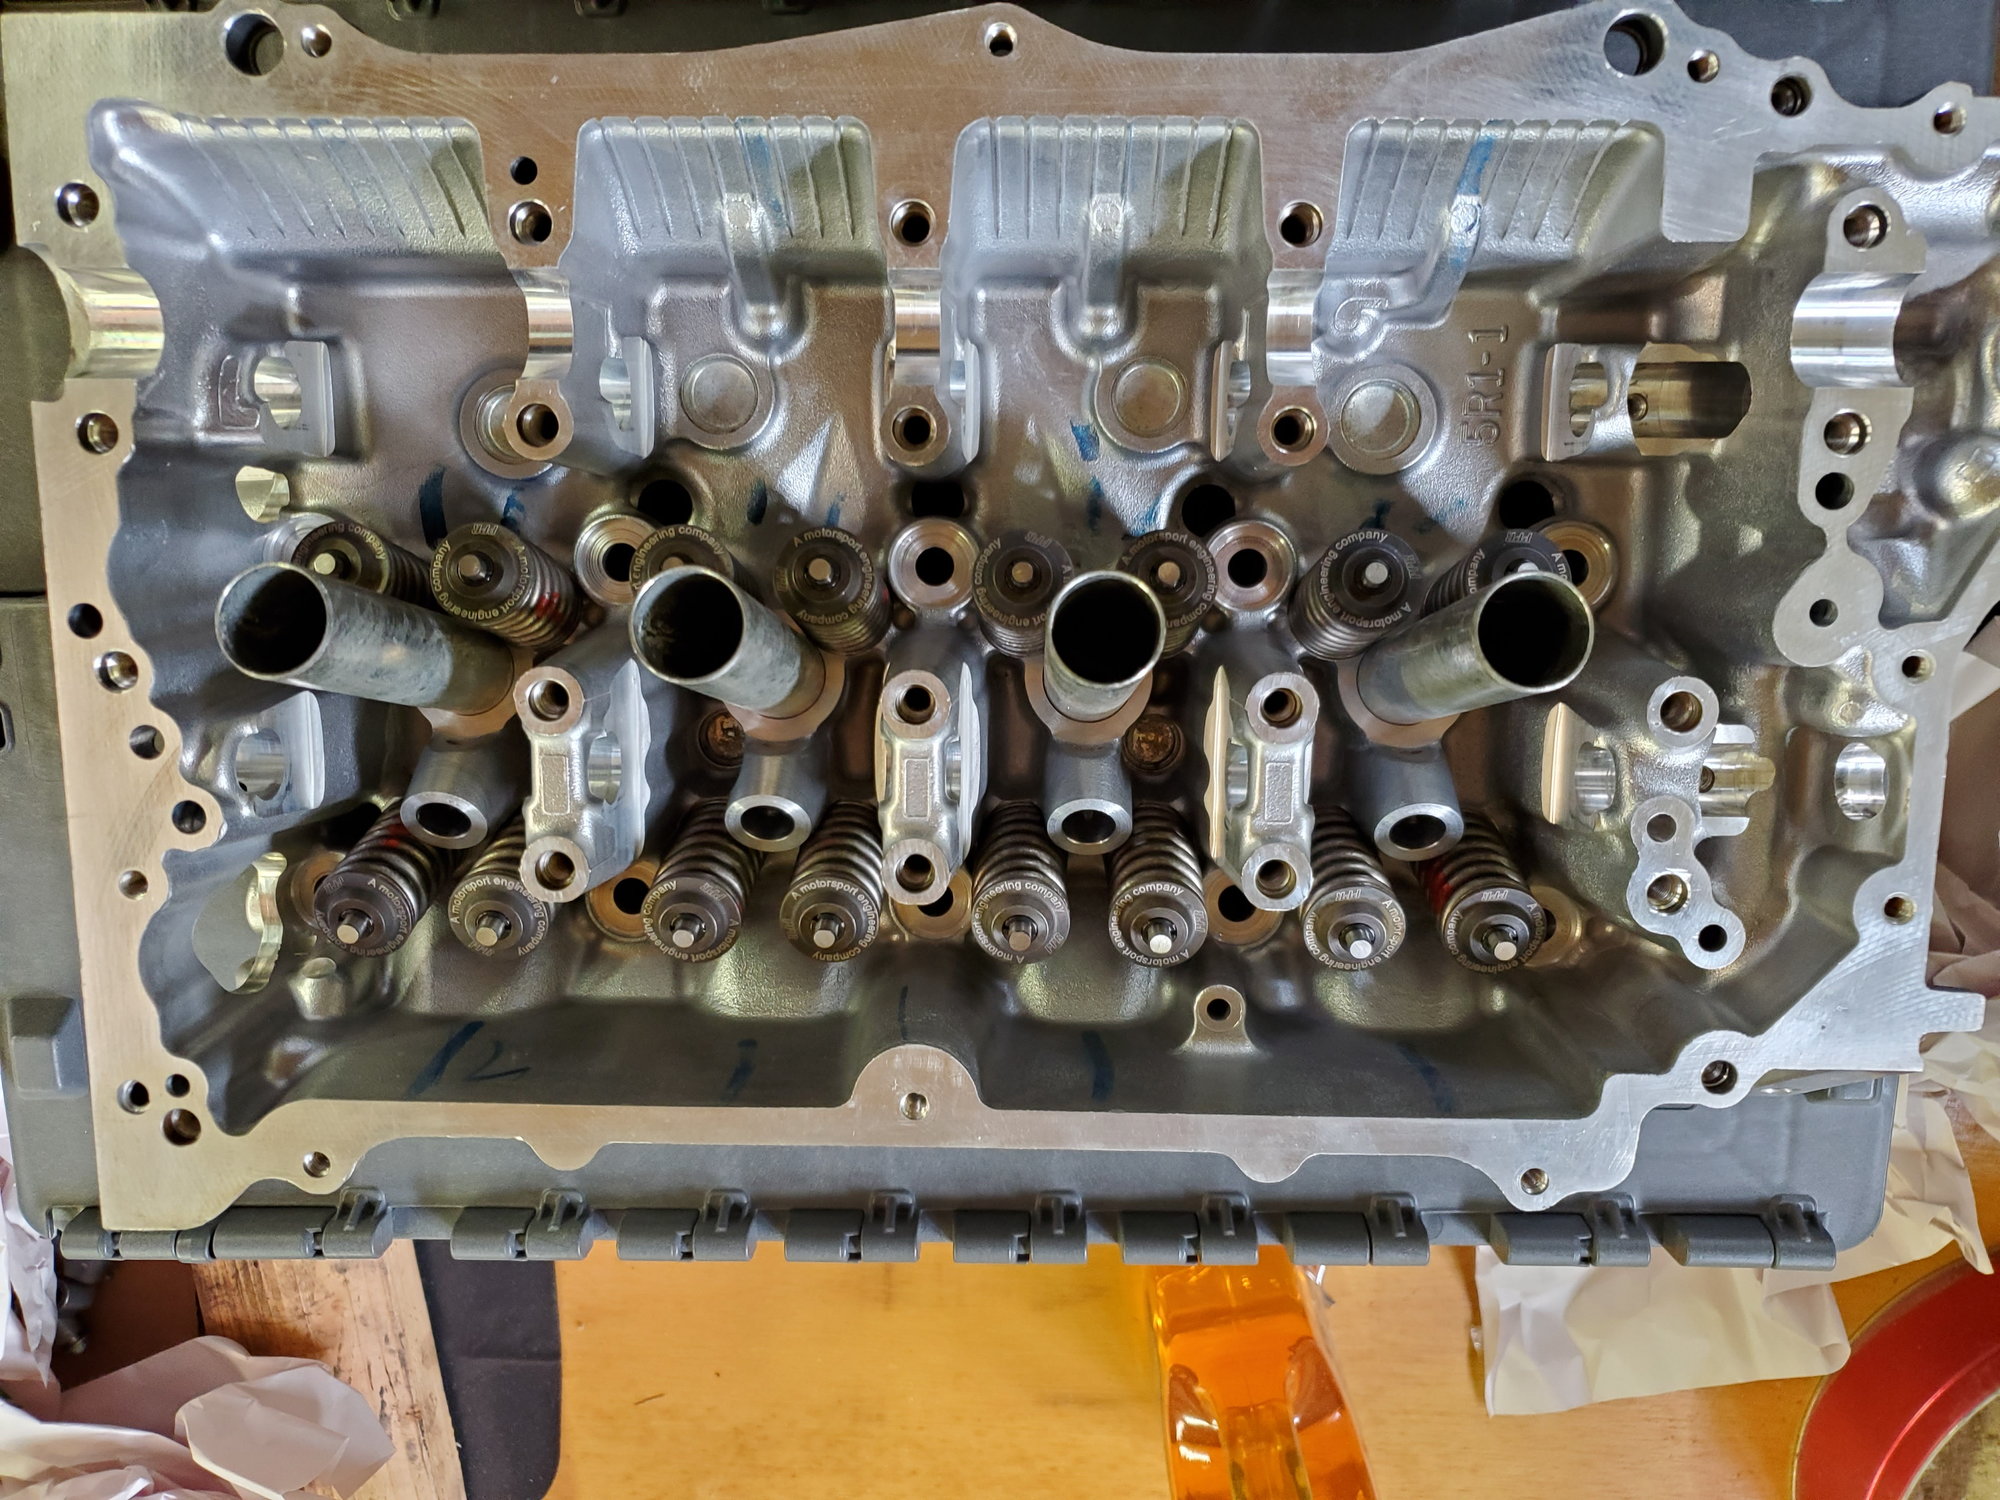 L15B1 Max Effort NA Engine Build Thread - Page 2 - Unofficial Honda FIT ...